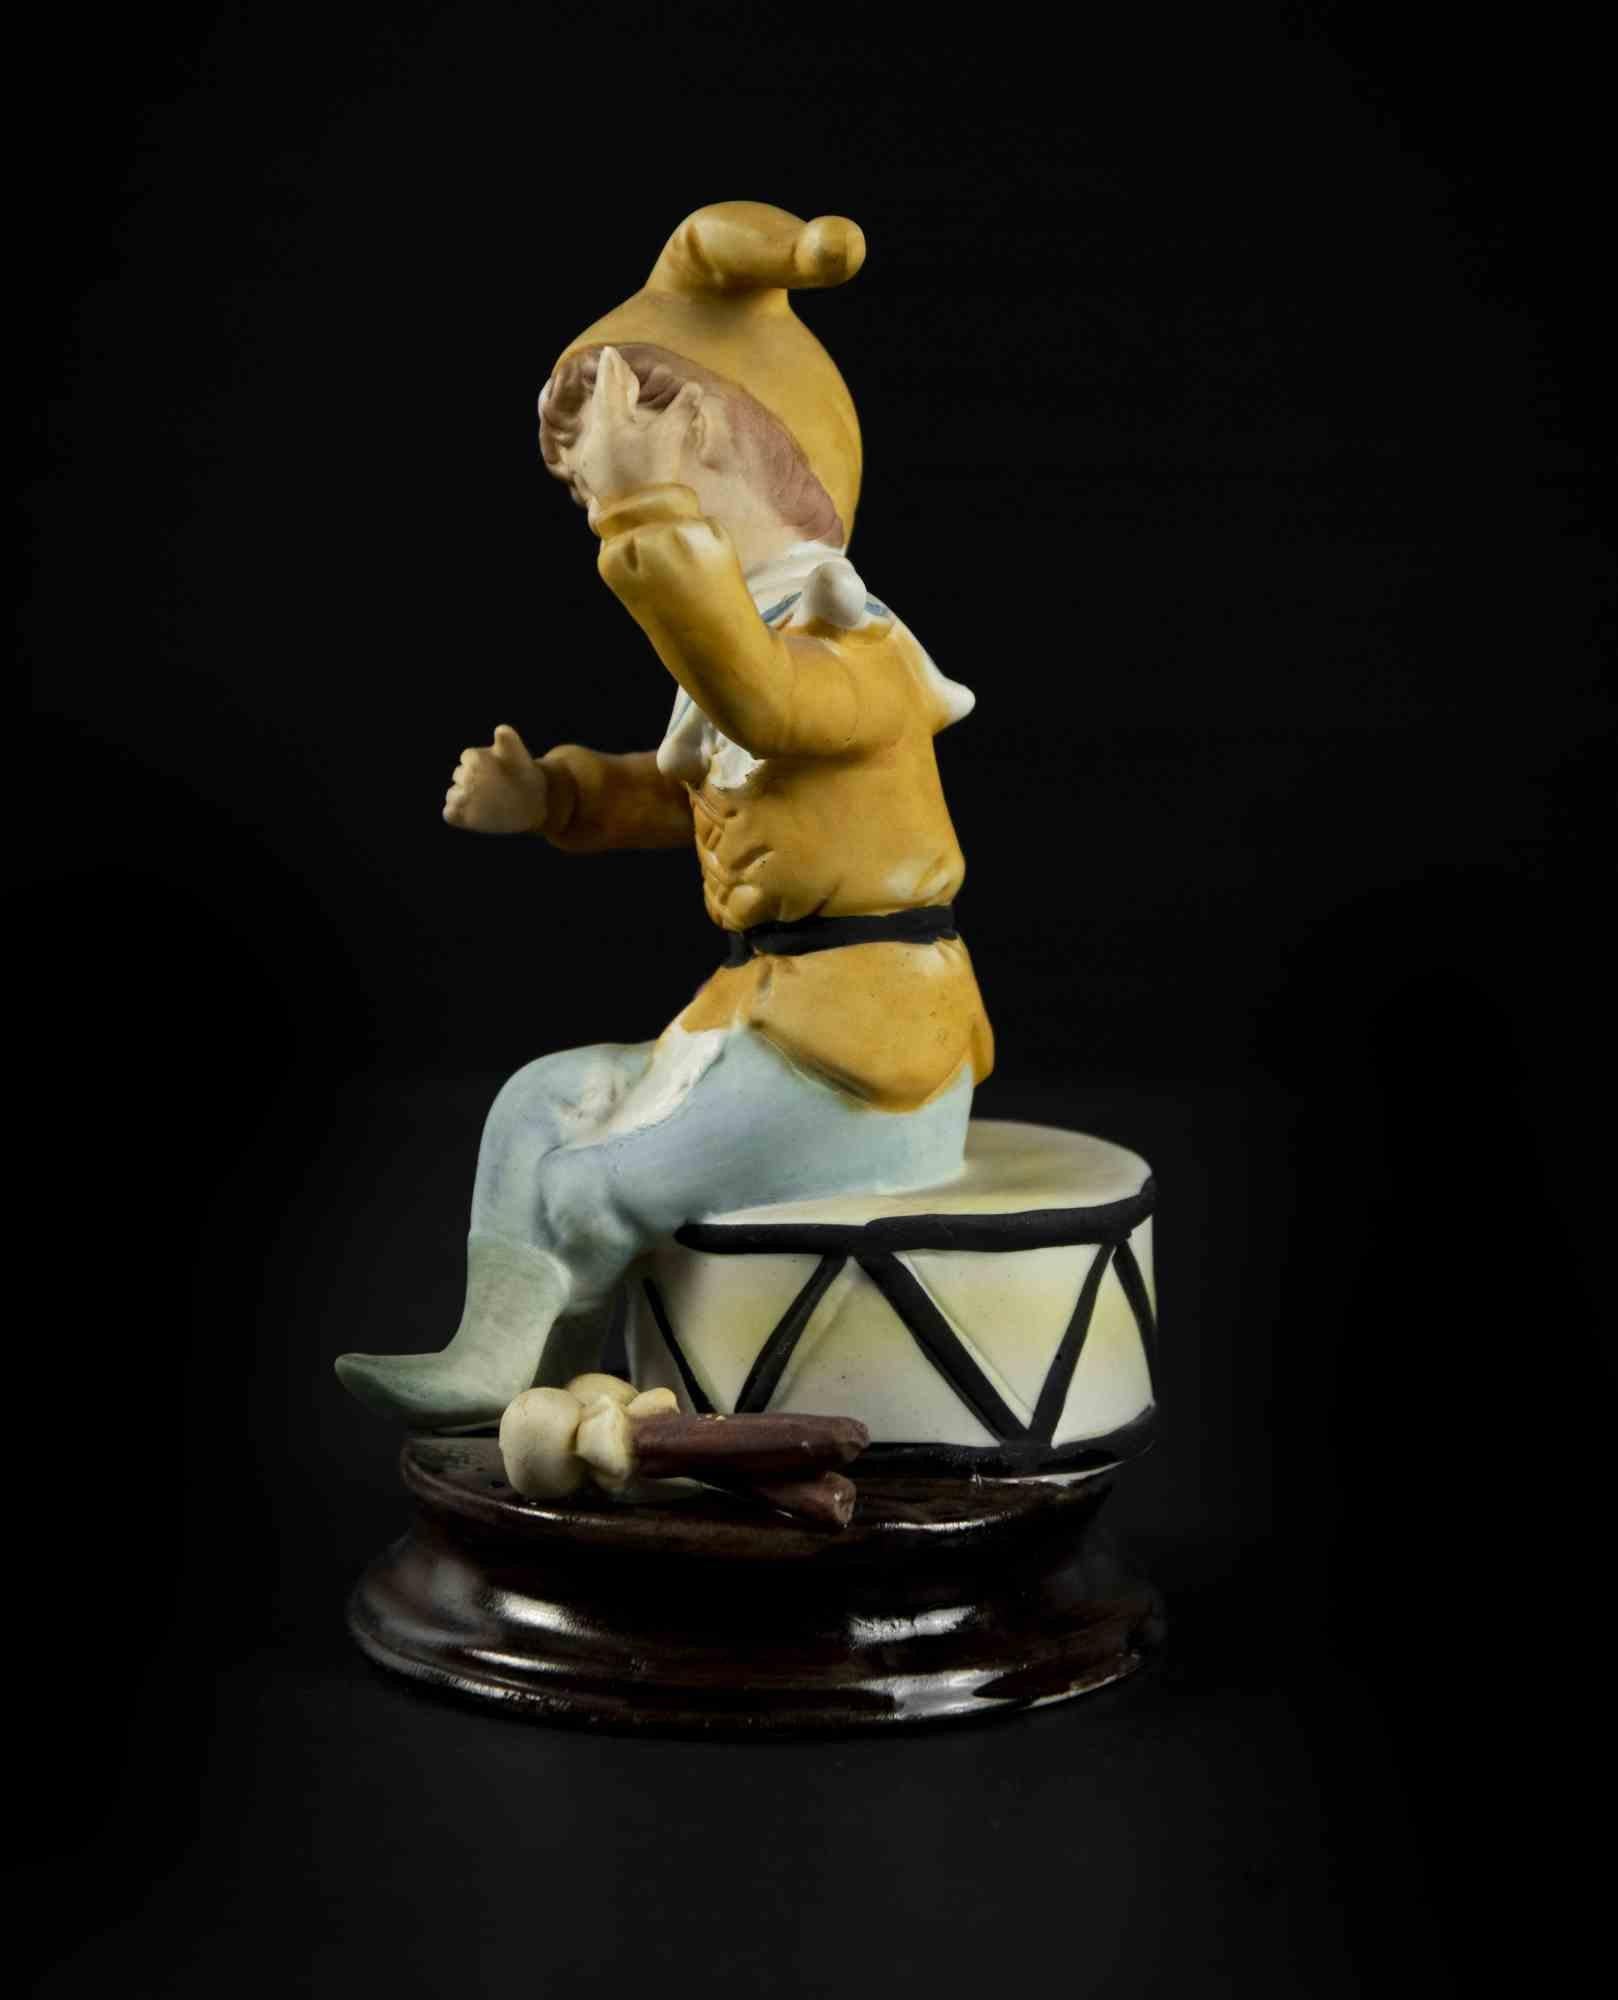 Child and Tambourine is an original decorative object realized in the second half of the 20th century.

Made in Italy. 

Original colored hand-made terracotta. 

The object is depicts a child that is standing on a tambourine with a funny